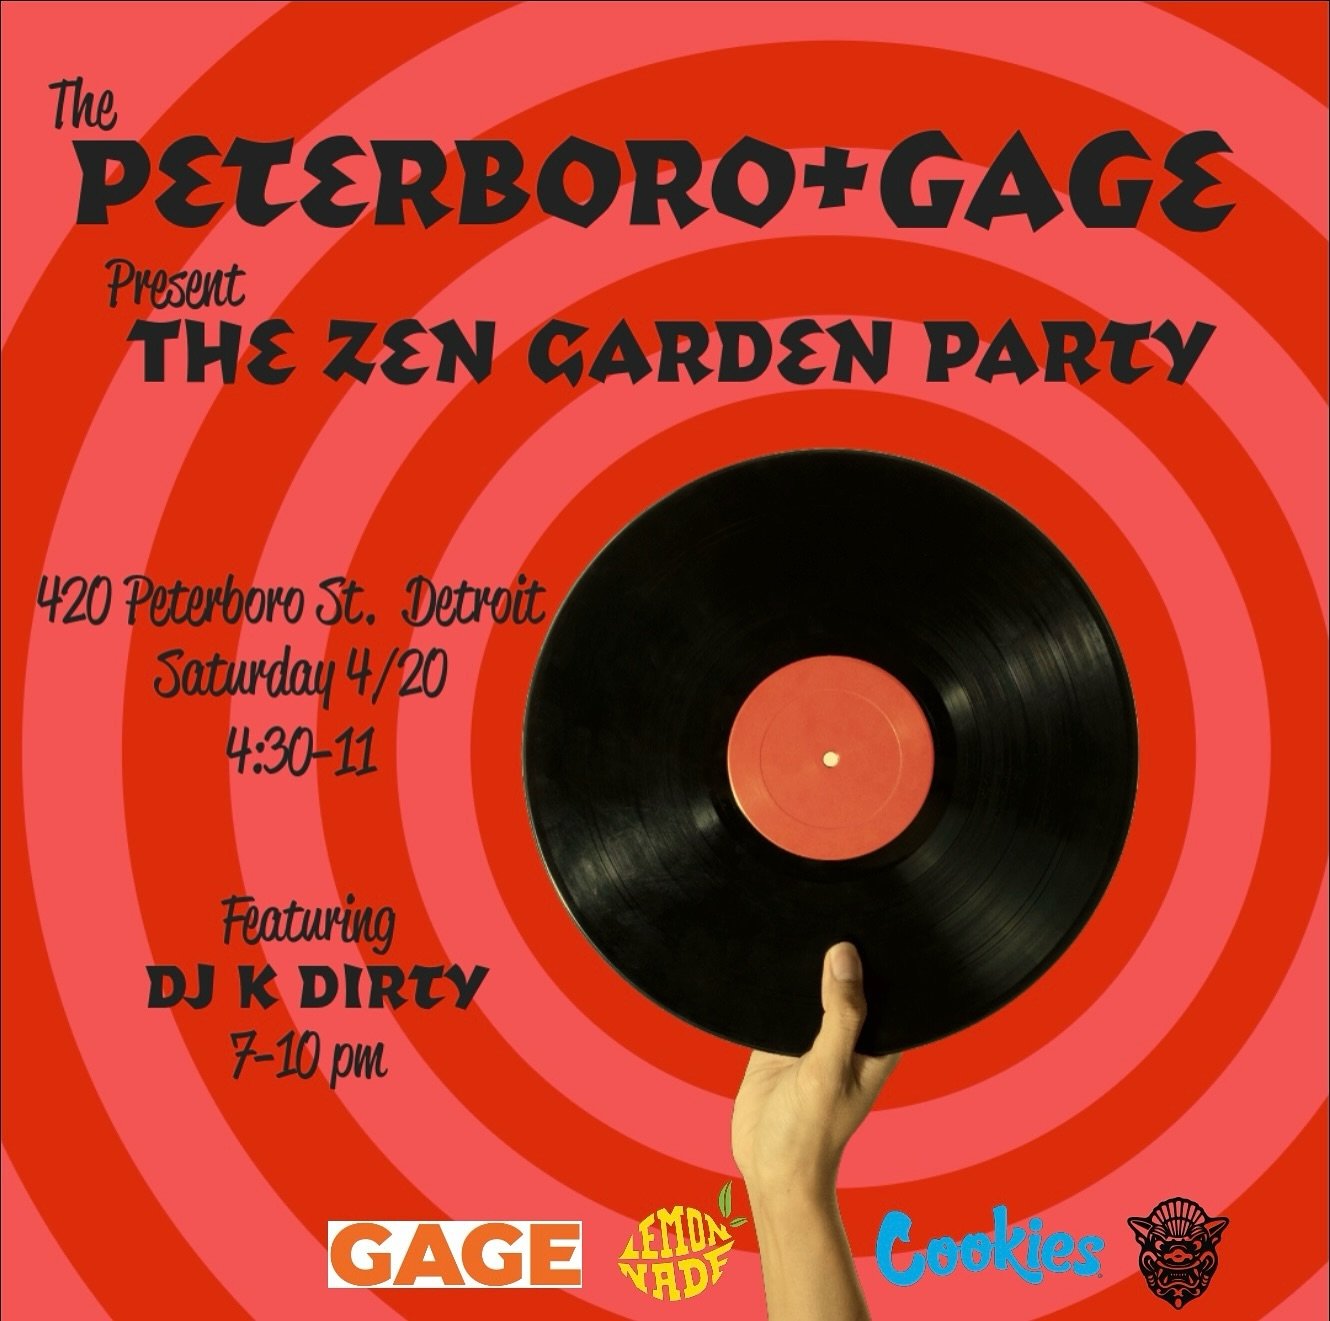 We&rsquo;ve teamed up with Gage, Cookies &amp; Lemonnade for the ultimate kick-off to patio season🌿

✨ Join us for &lsquo;The Zen Garden Party&rsquo; on 4/20 from 4:30-11pm. Let&rsquo;s celebrate the arrival of Spring and the grand opening of our pa